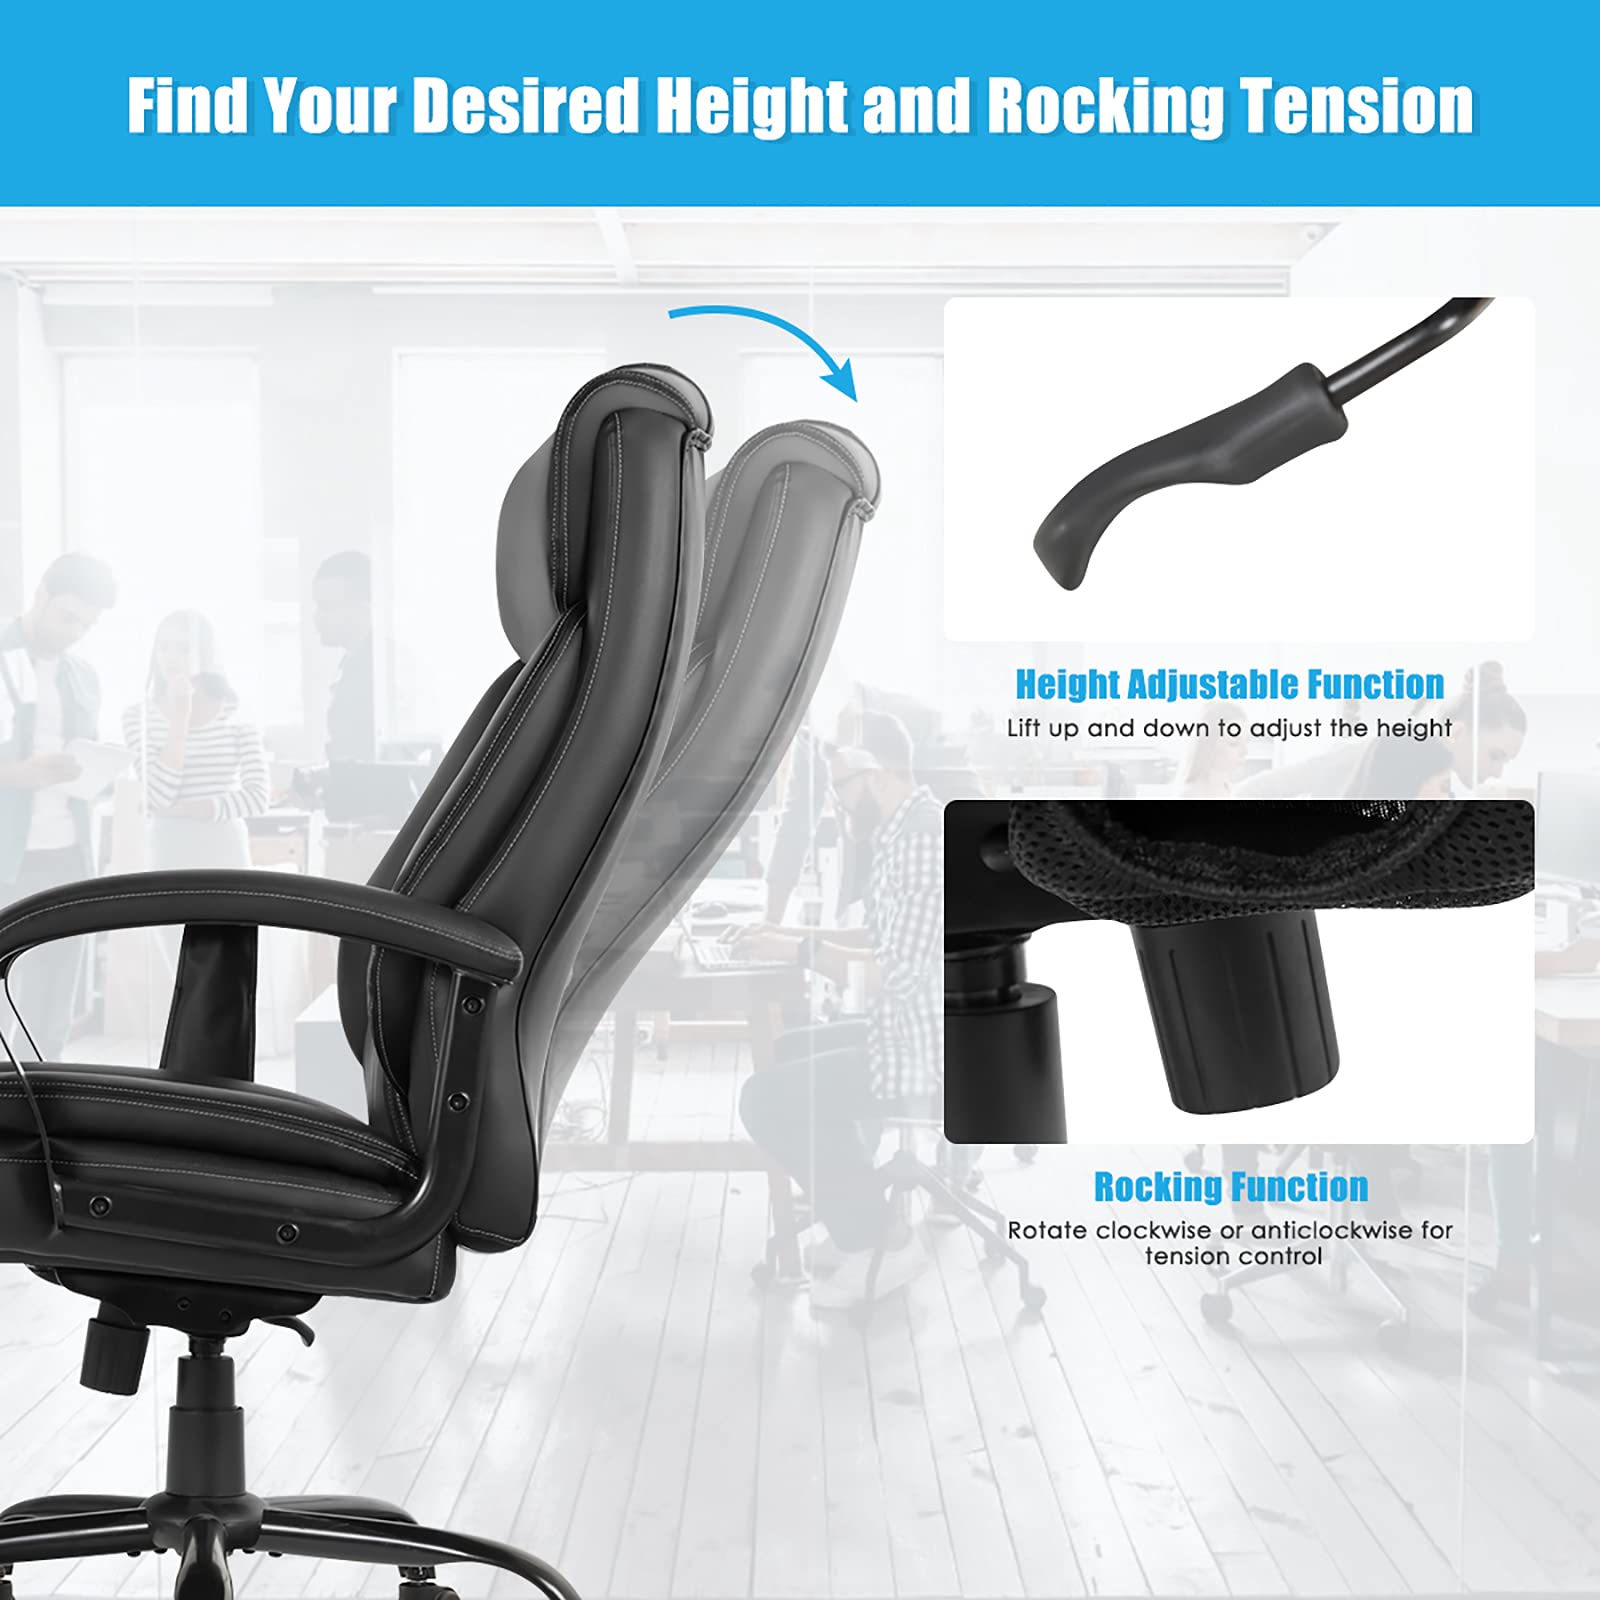 POWERSTONE Big and Tall Office Chair 500lbs PU Leather Ergonomic Massage Office Chairs Wide Seat High Back Adjustable Computer Chair Large Executive Chair Swivel Rolling Chair